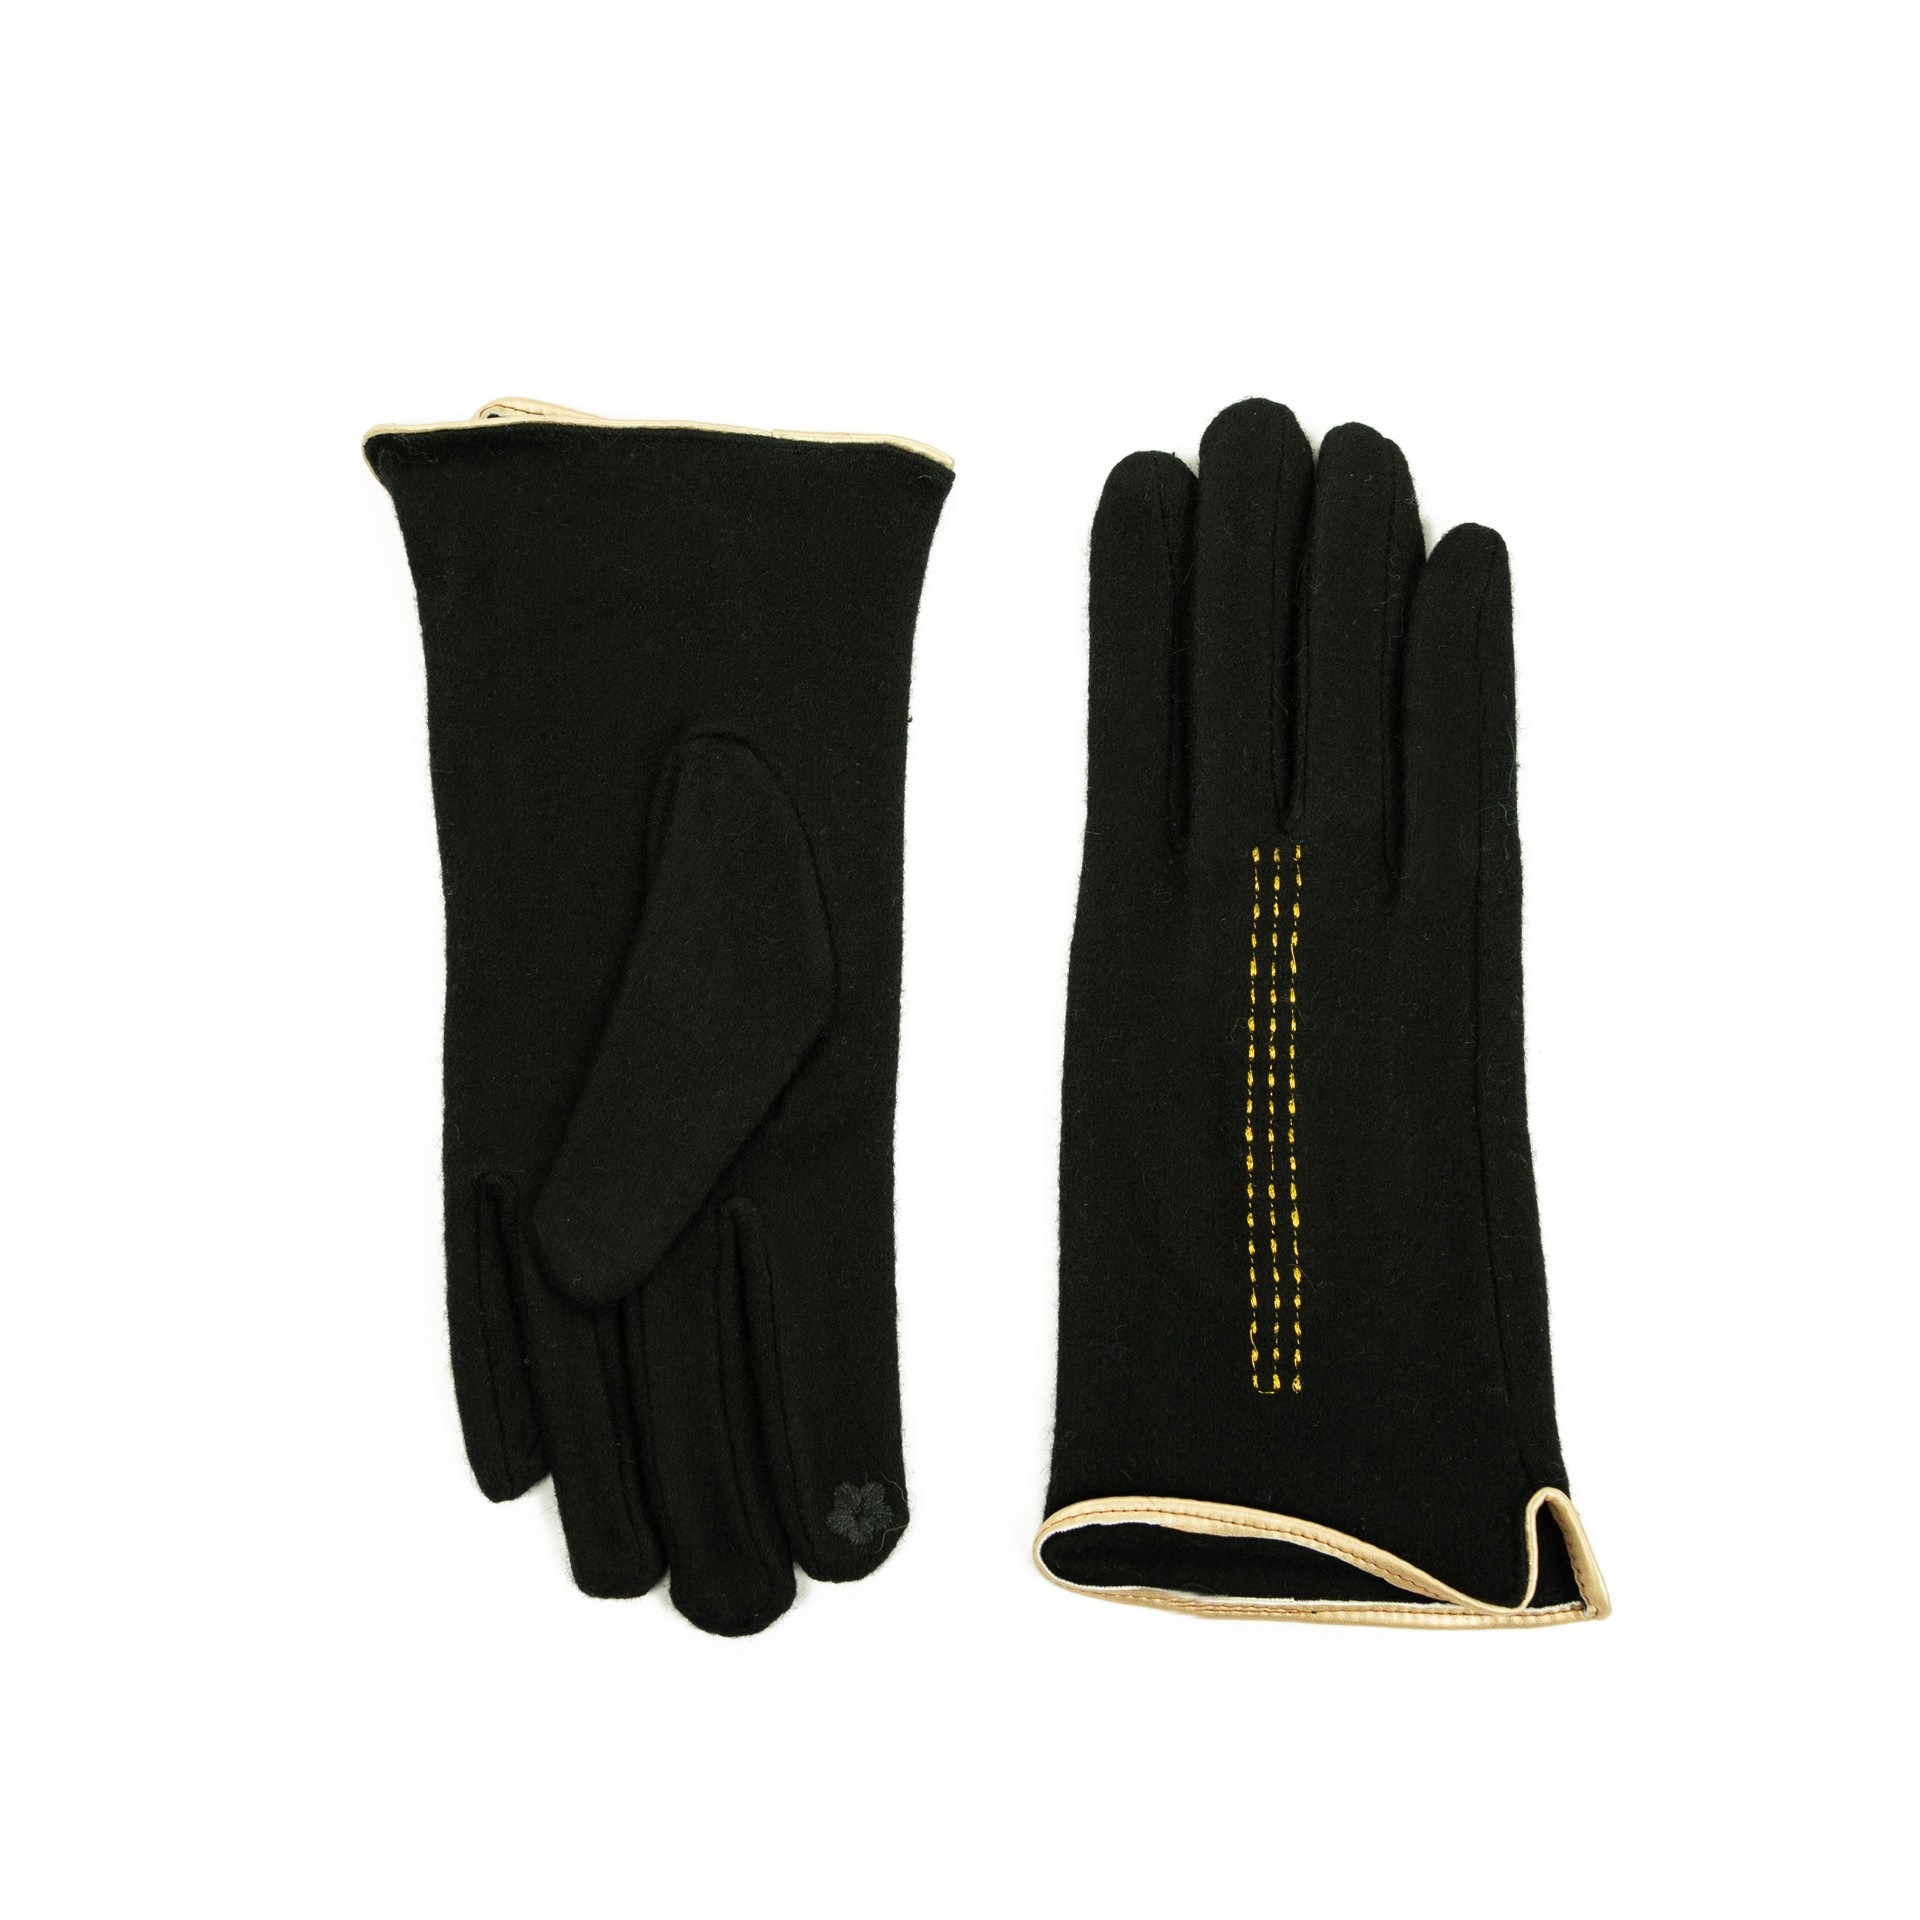 Art Of Polo Woman's Gloves Rk23348-1